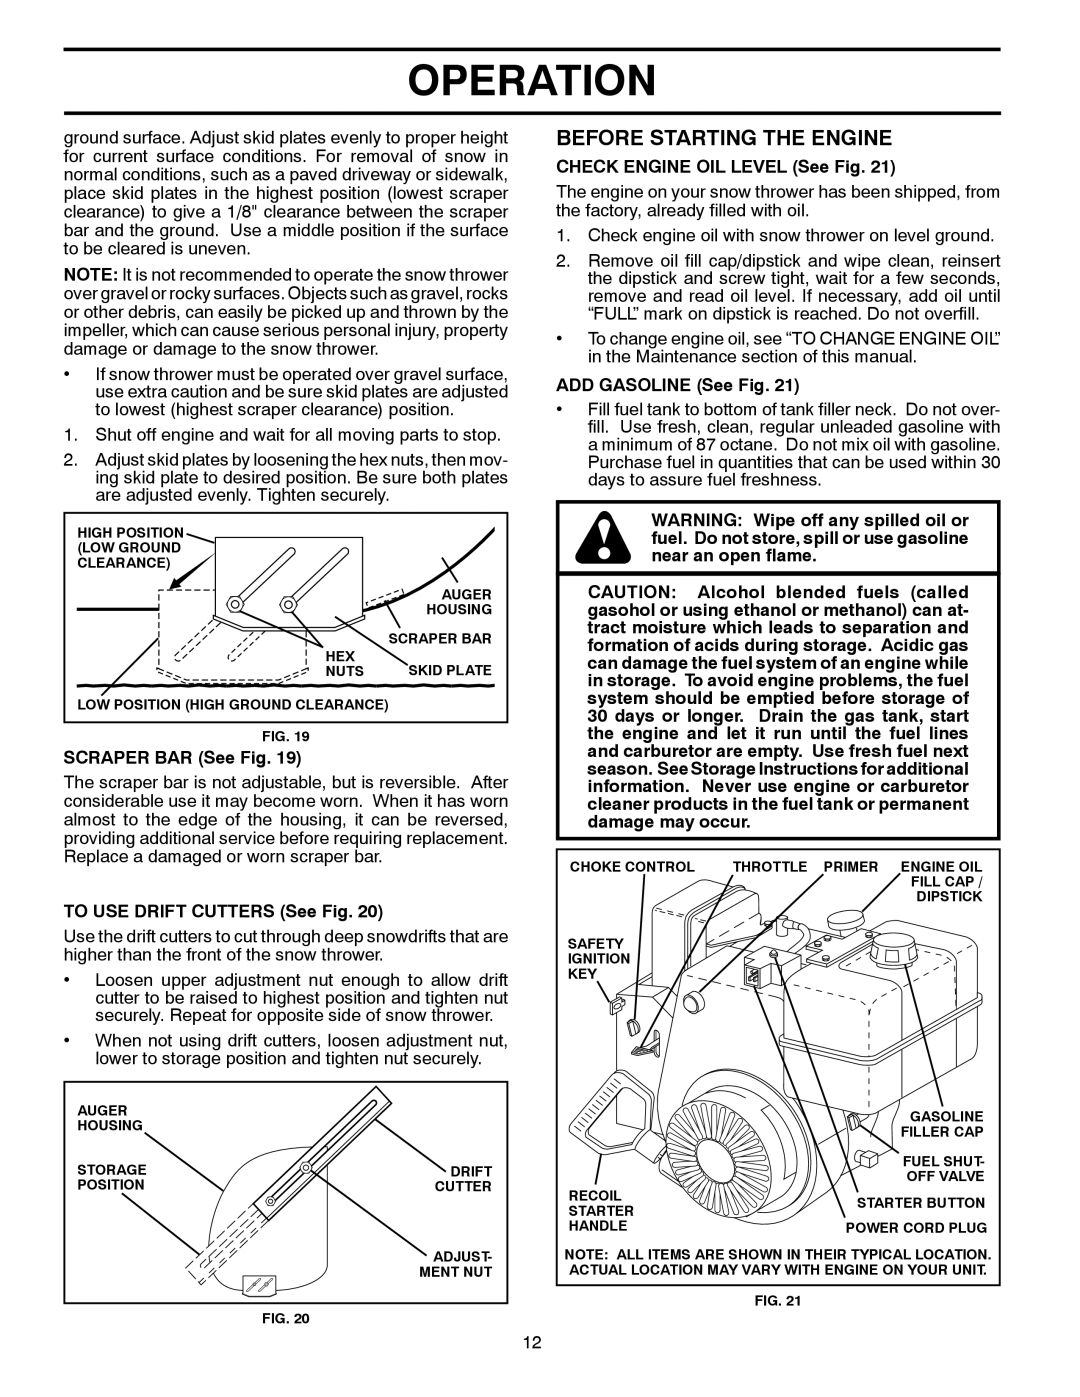 Poulan 420925, 961980022 Before Starting The Engine, Operation, SCRAPER BAR See Fig, CHECK ENGINE OIL LEVEL See Fig 